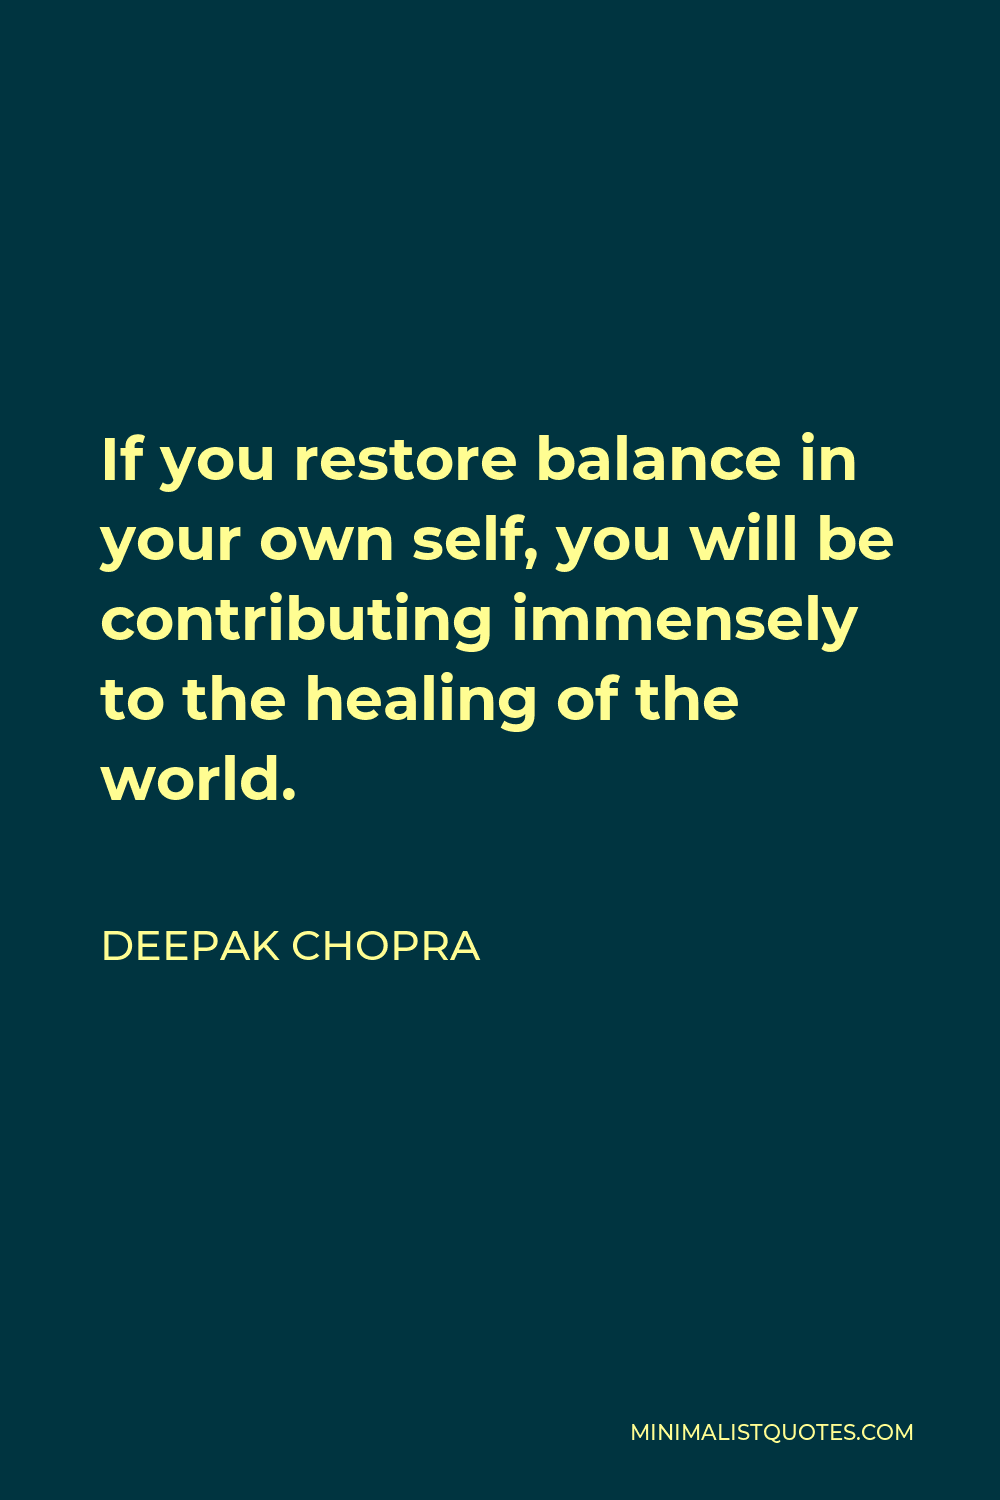 Deepak Chopra Quote: If you restore balance in your own self, you